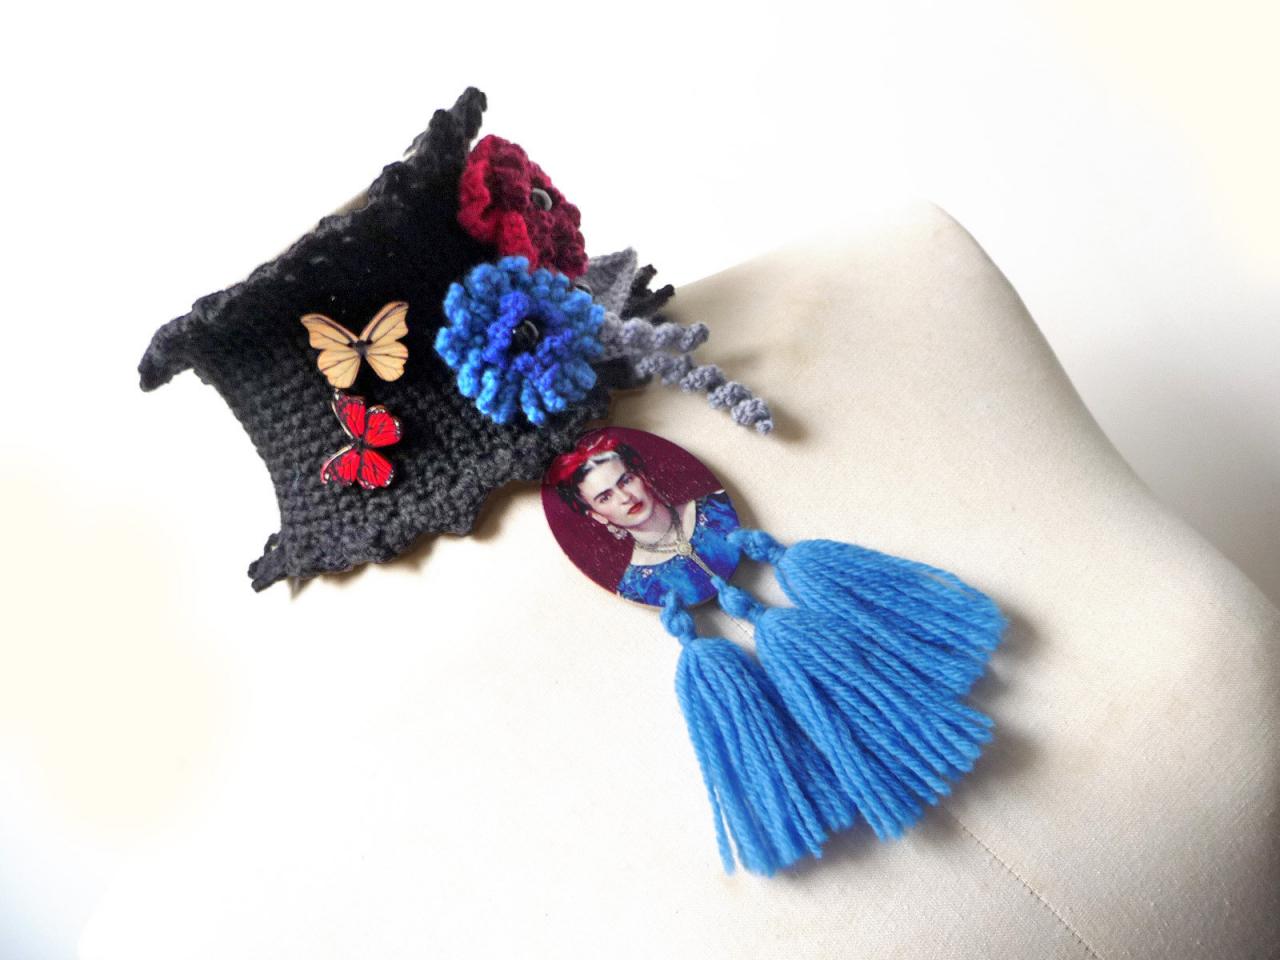 Black Choker Necklace with Tassels - Black Neckwarmer - Wool Crochet Cowl Scarf with Red and Blue Flowers, Grey Leaves and Butterflies